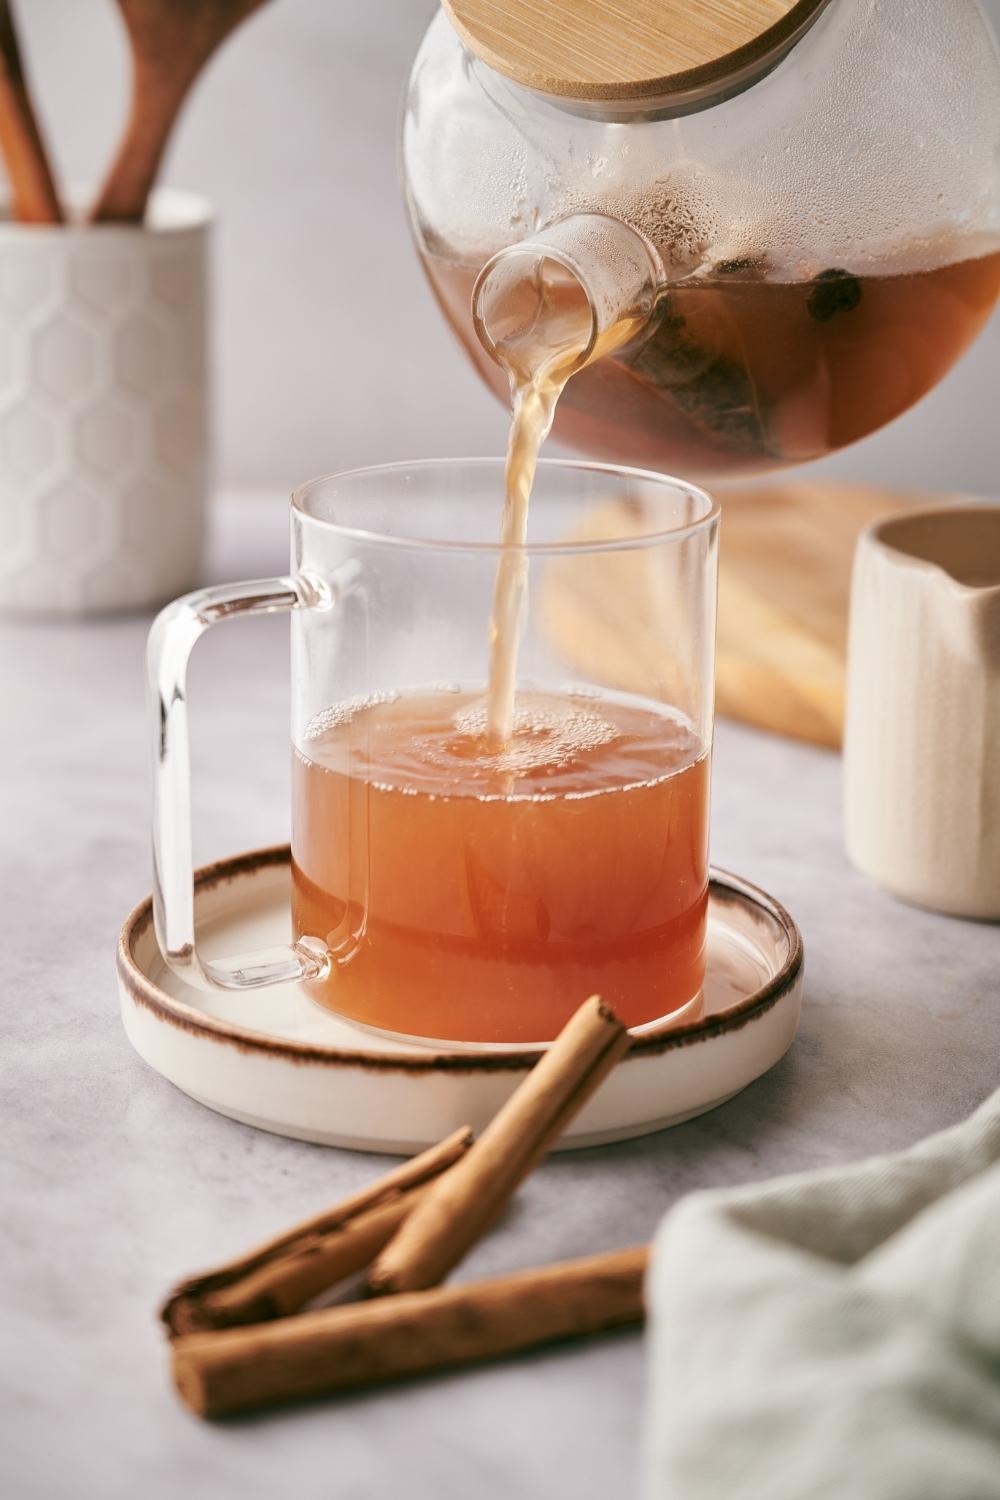 A small teapot with chai tea is being poured into a clear mug.